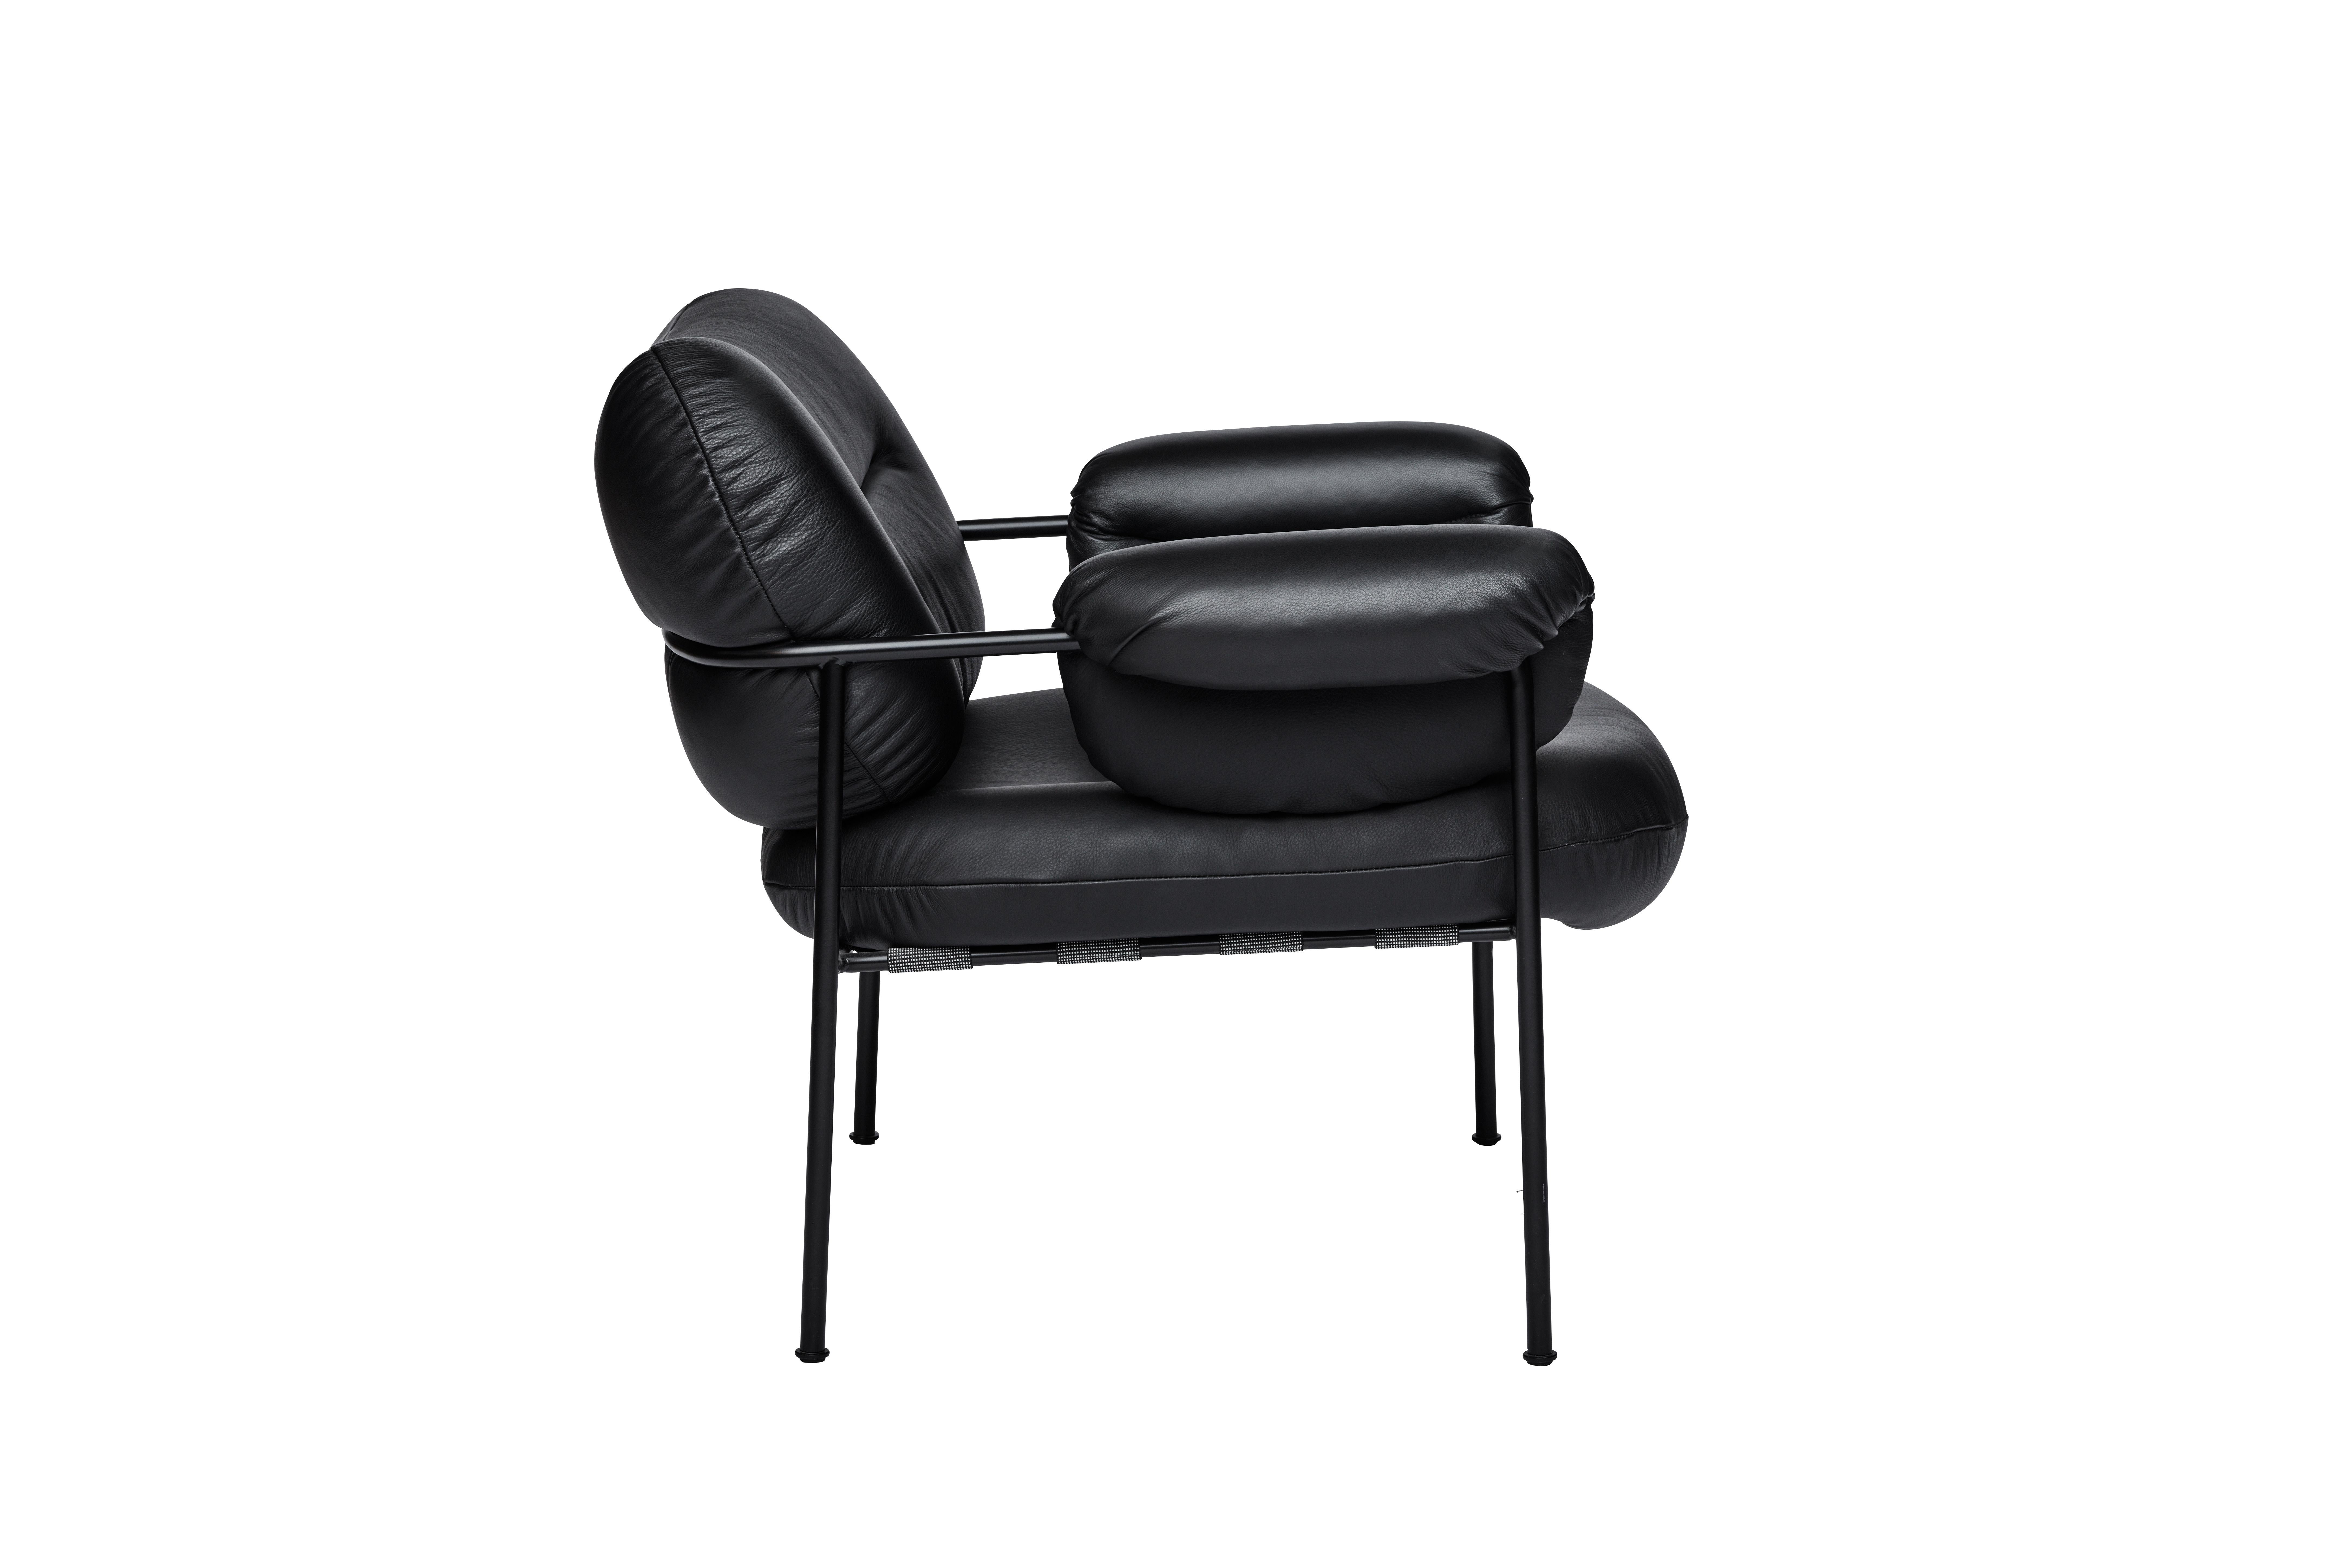 Bollo Armchair by Andreas Engesvik for FOGIA

Model shown on main images: Black steel legs + Upholstery: Leather Elmosoft 999

Width: 81cm /32in
Depth: 81cm /32in
Height: 71cm /28in
Seat Height: 42.5cm /17in
Seat Depth: 54cm / 21in

The iconic Bollo